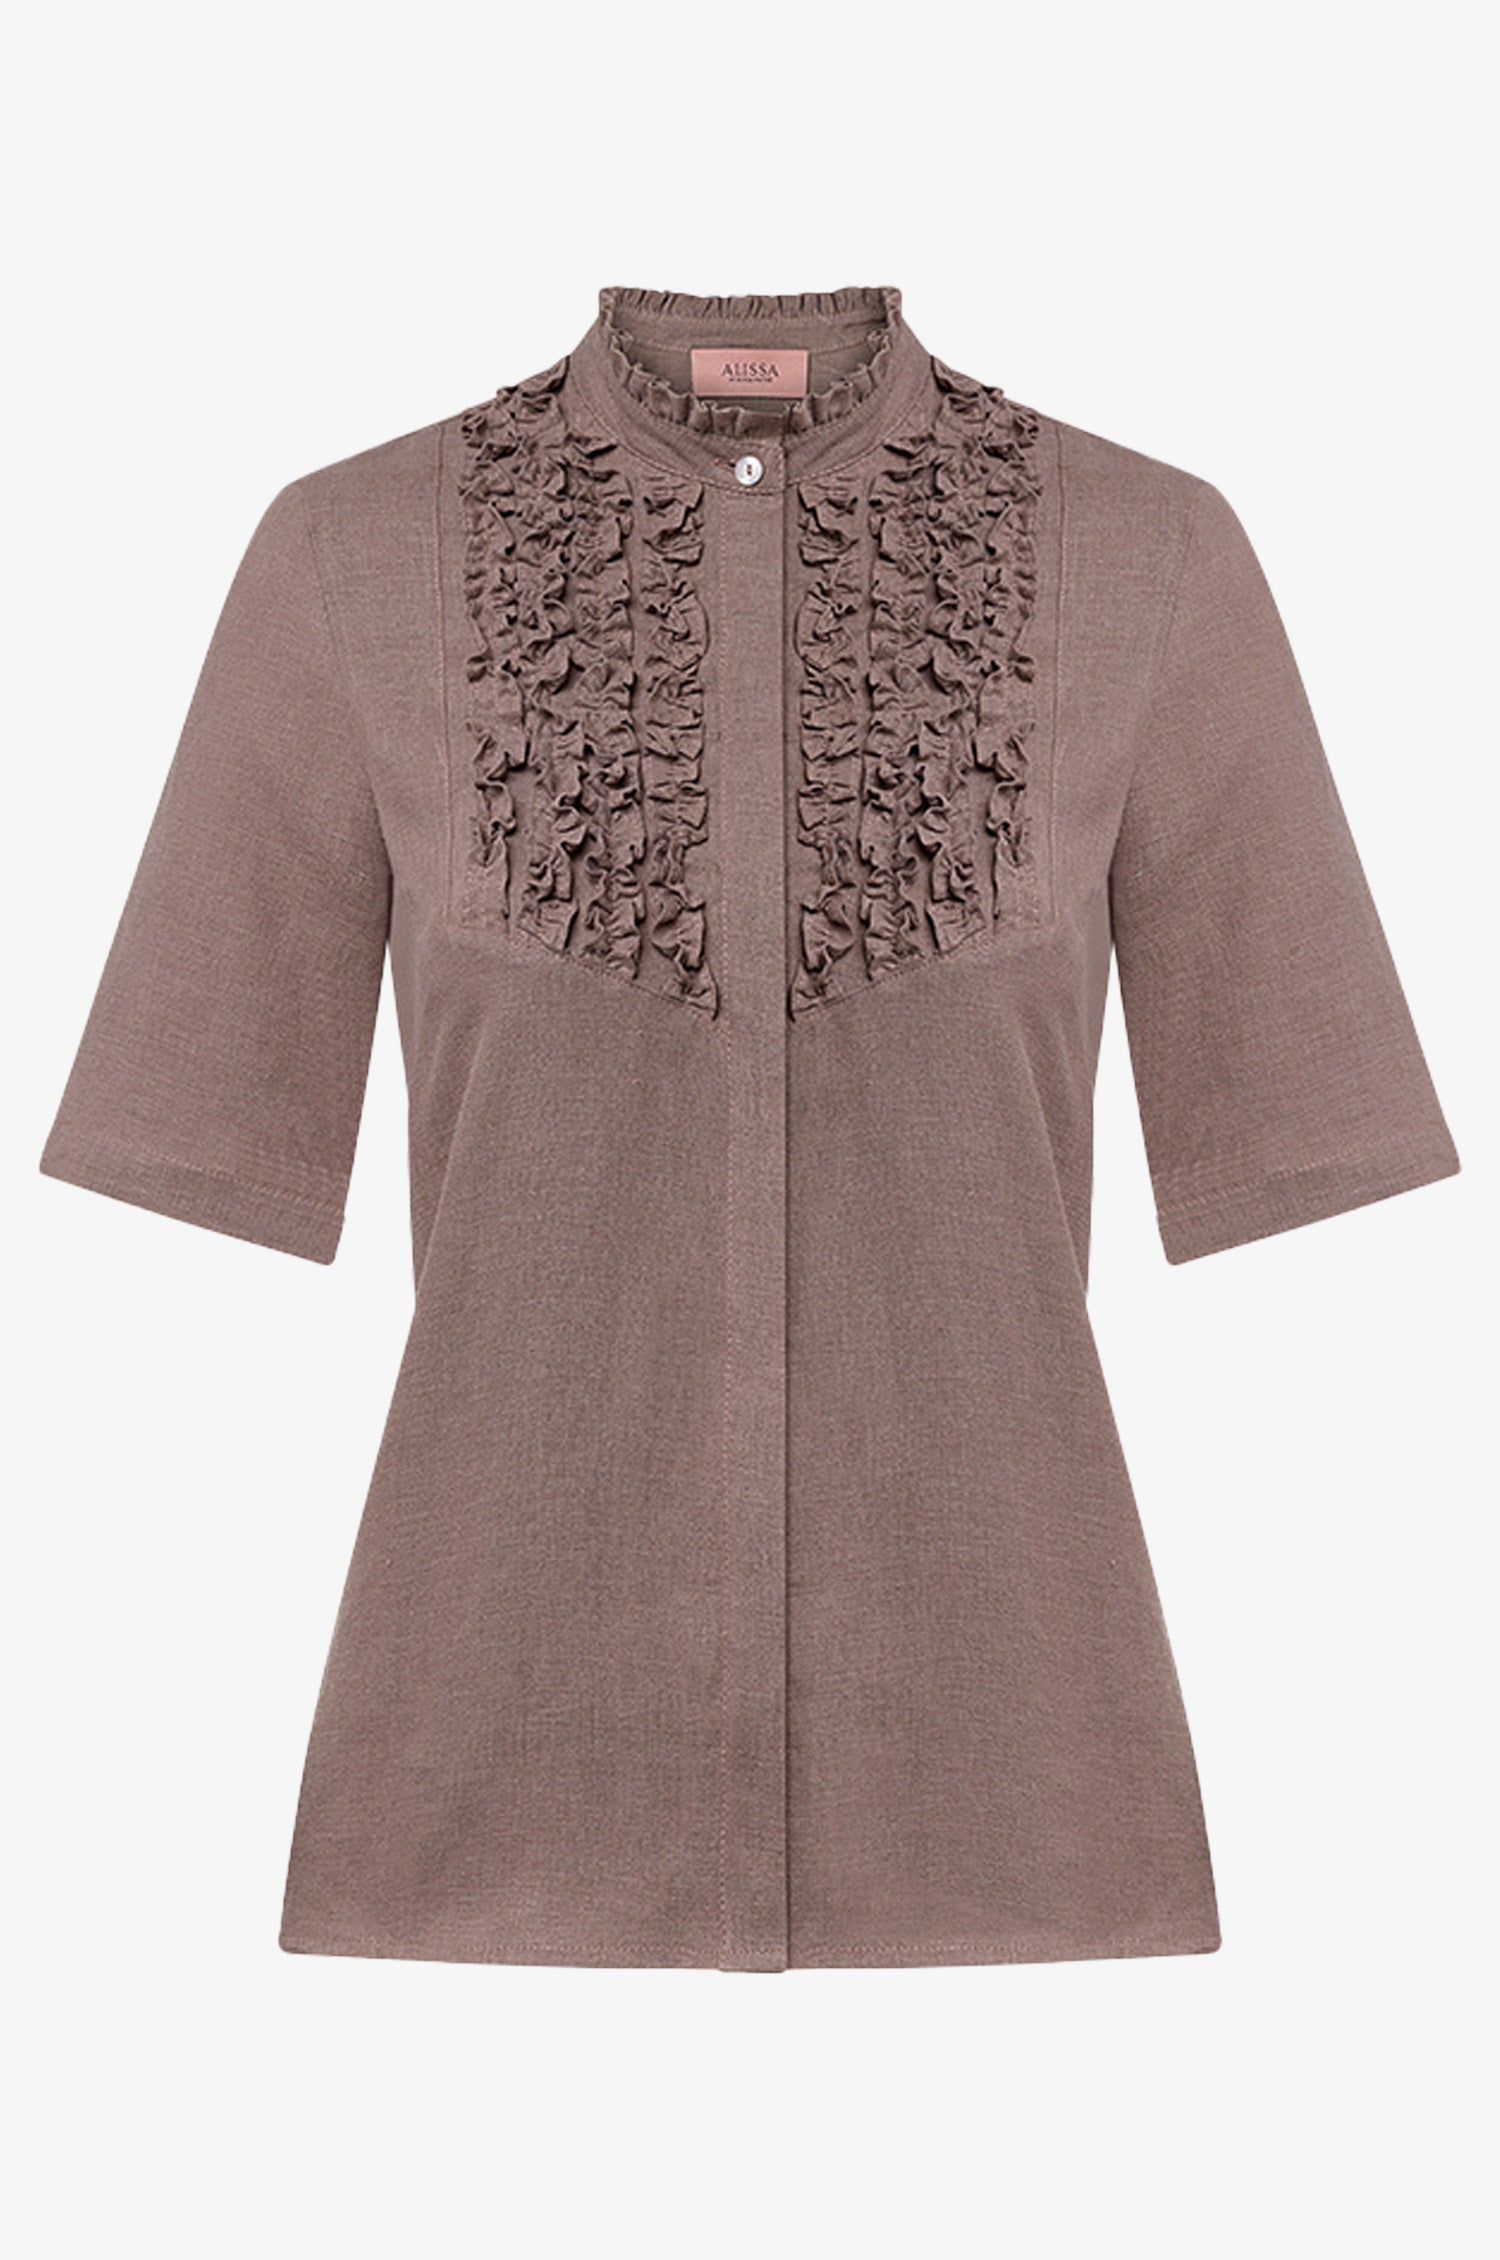 Bluse Hanna in Taupe mit Arm